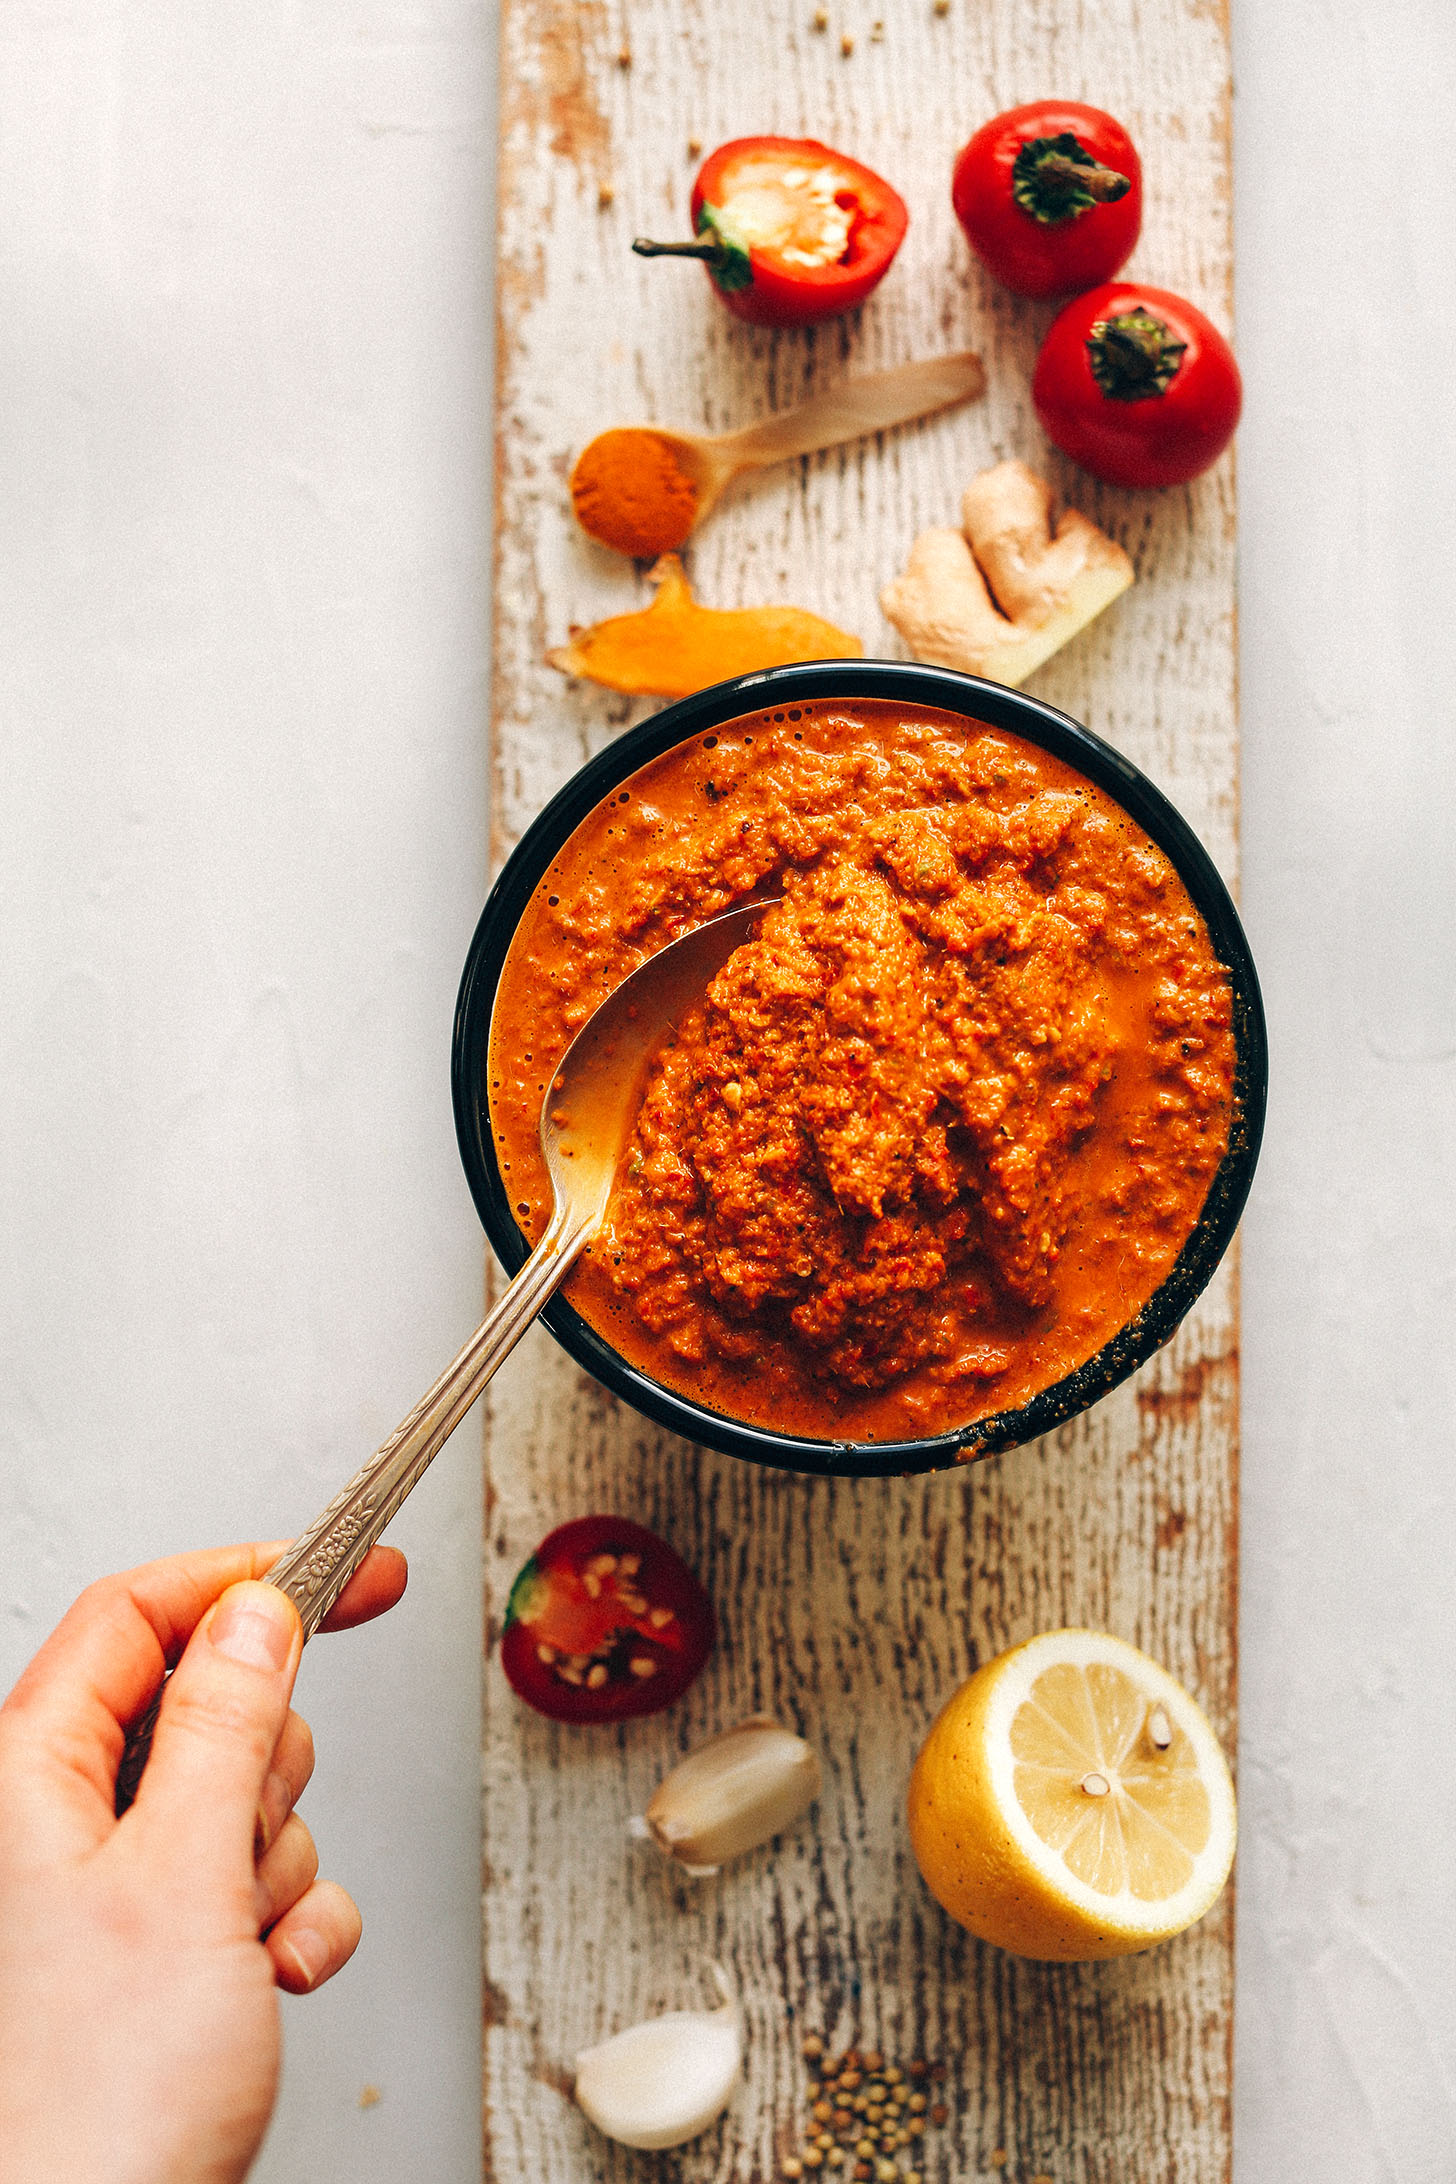 Grabbing a spoonful of our DIY Red Curry Paste for making a flavorful plant-based dish